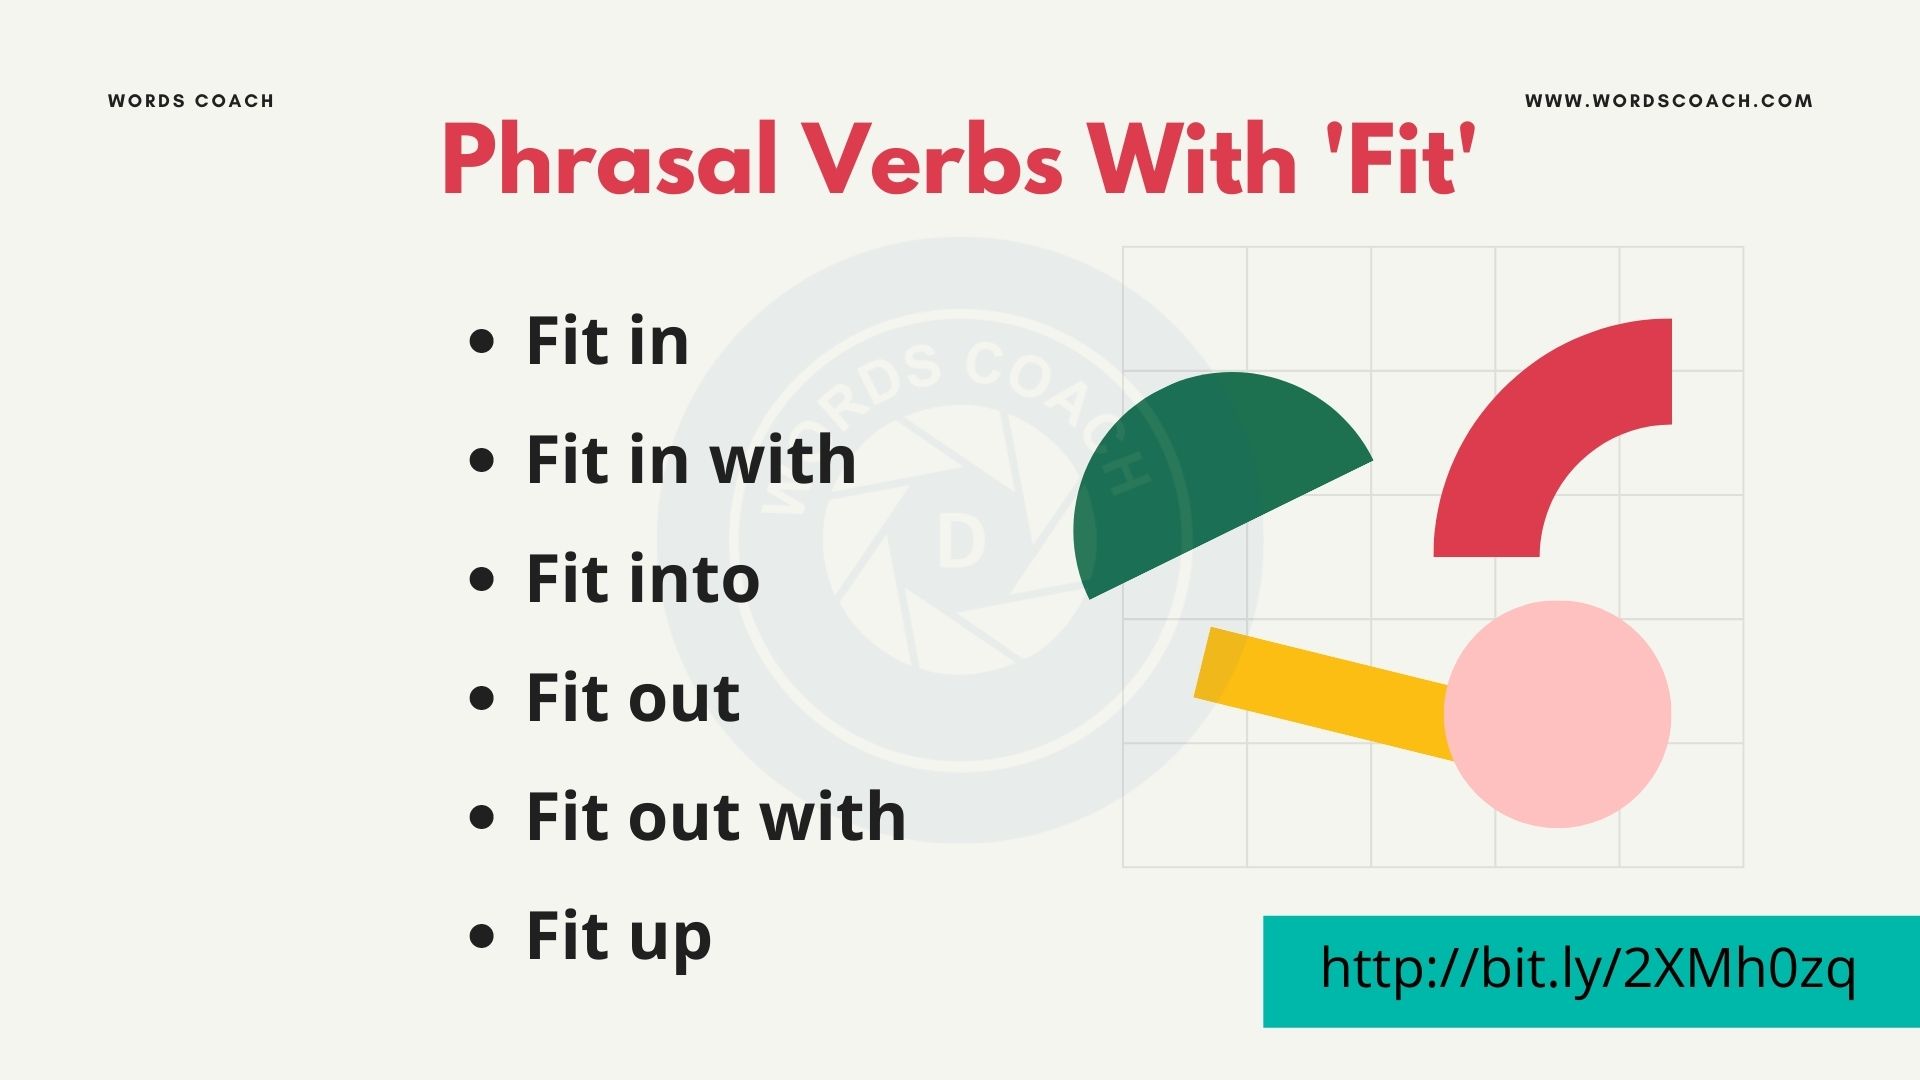 Phrasal Verbs With 'Fit' - wordscoach.com